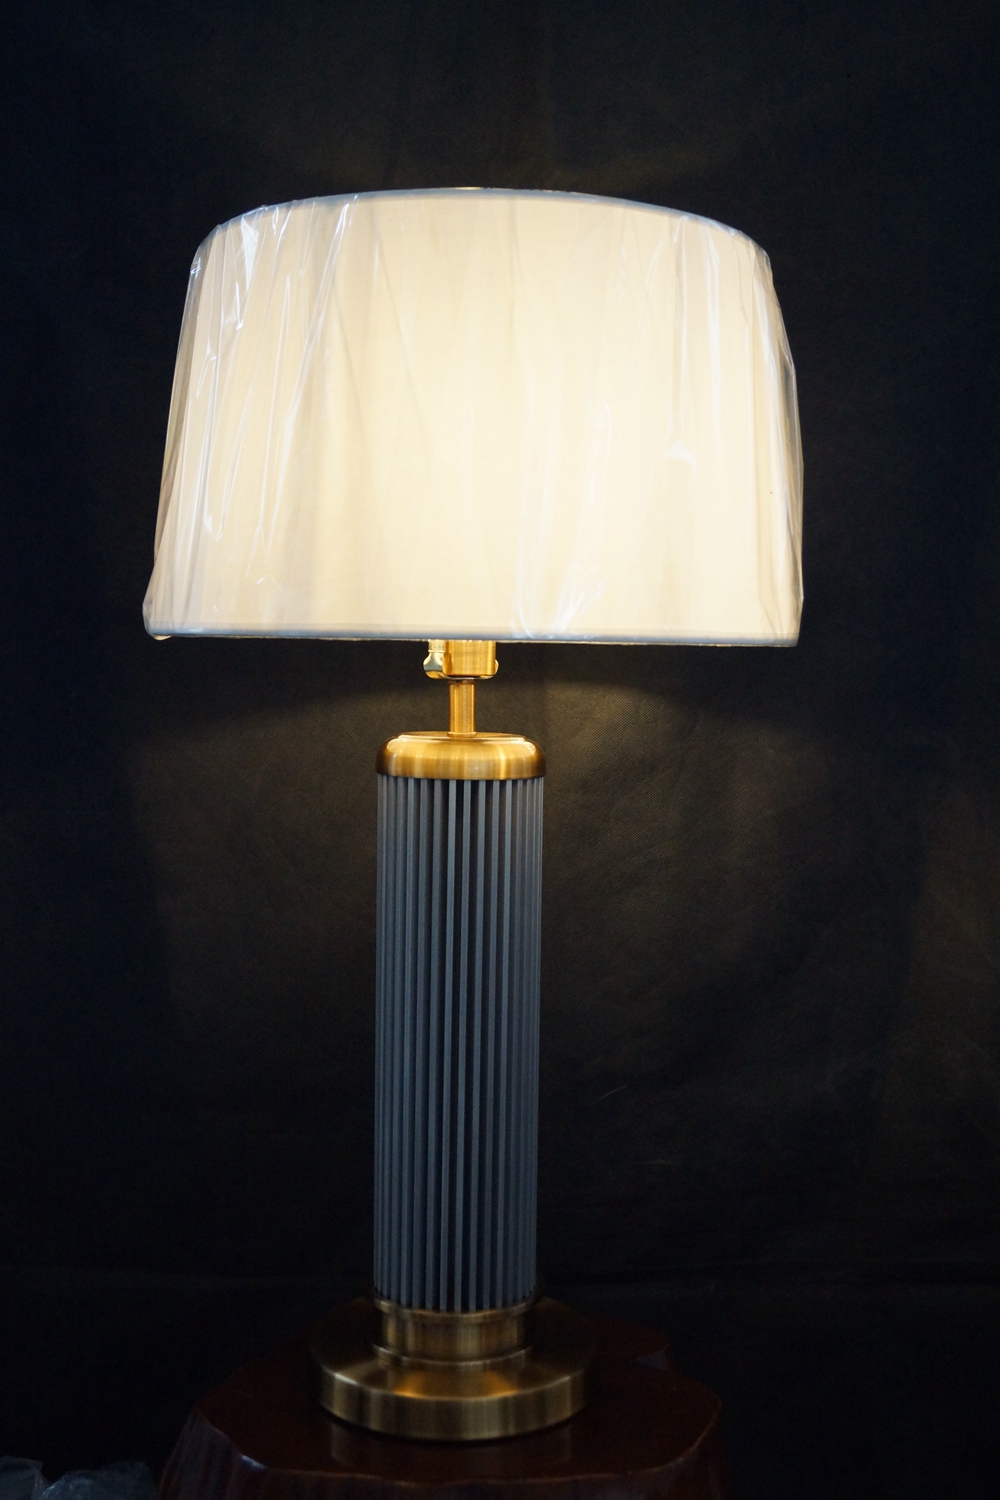 Home Decoration Fabric Modern Table Lamp (KAT6107)